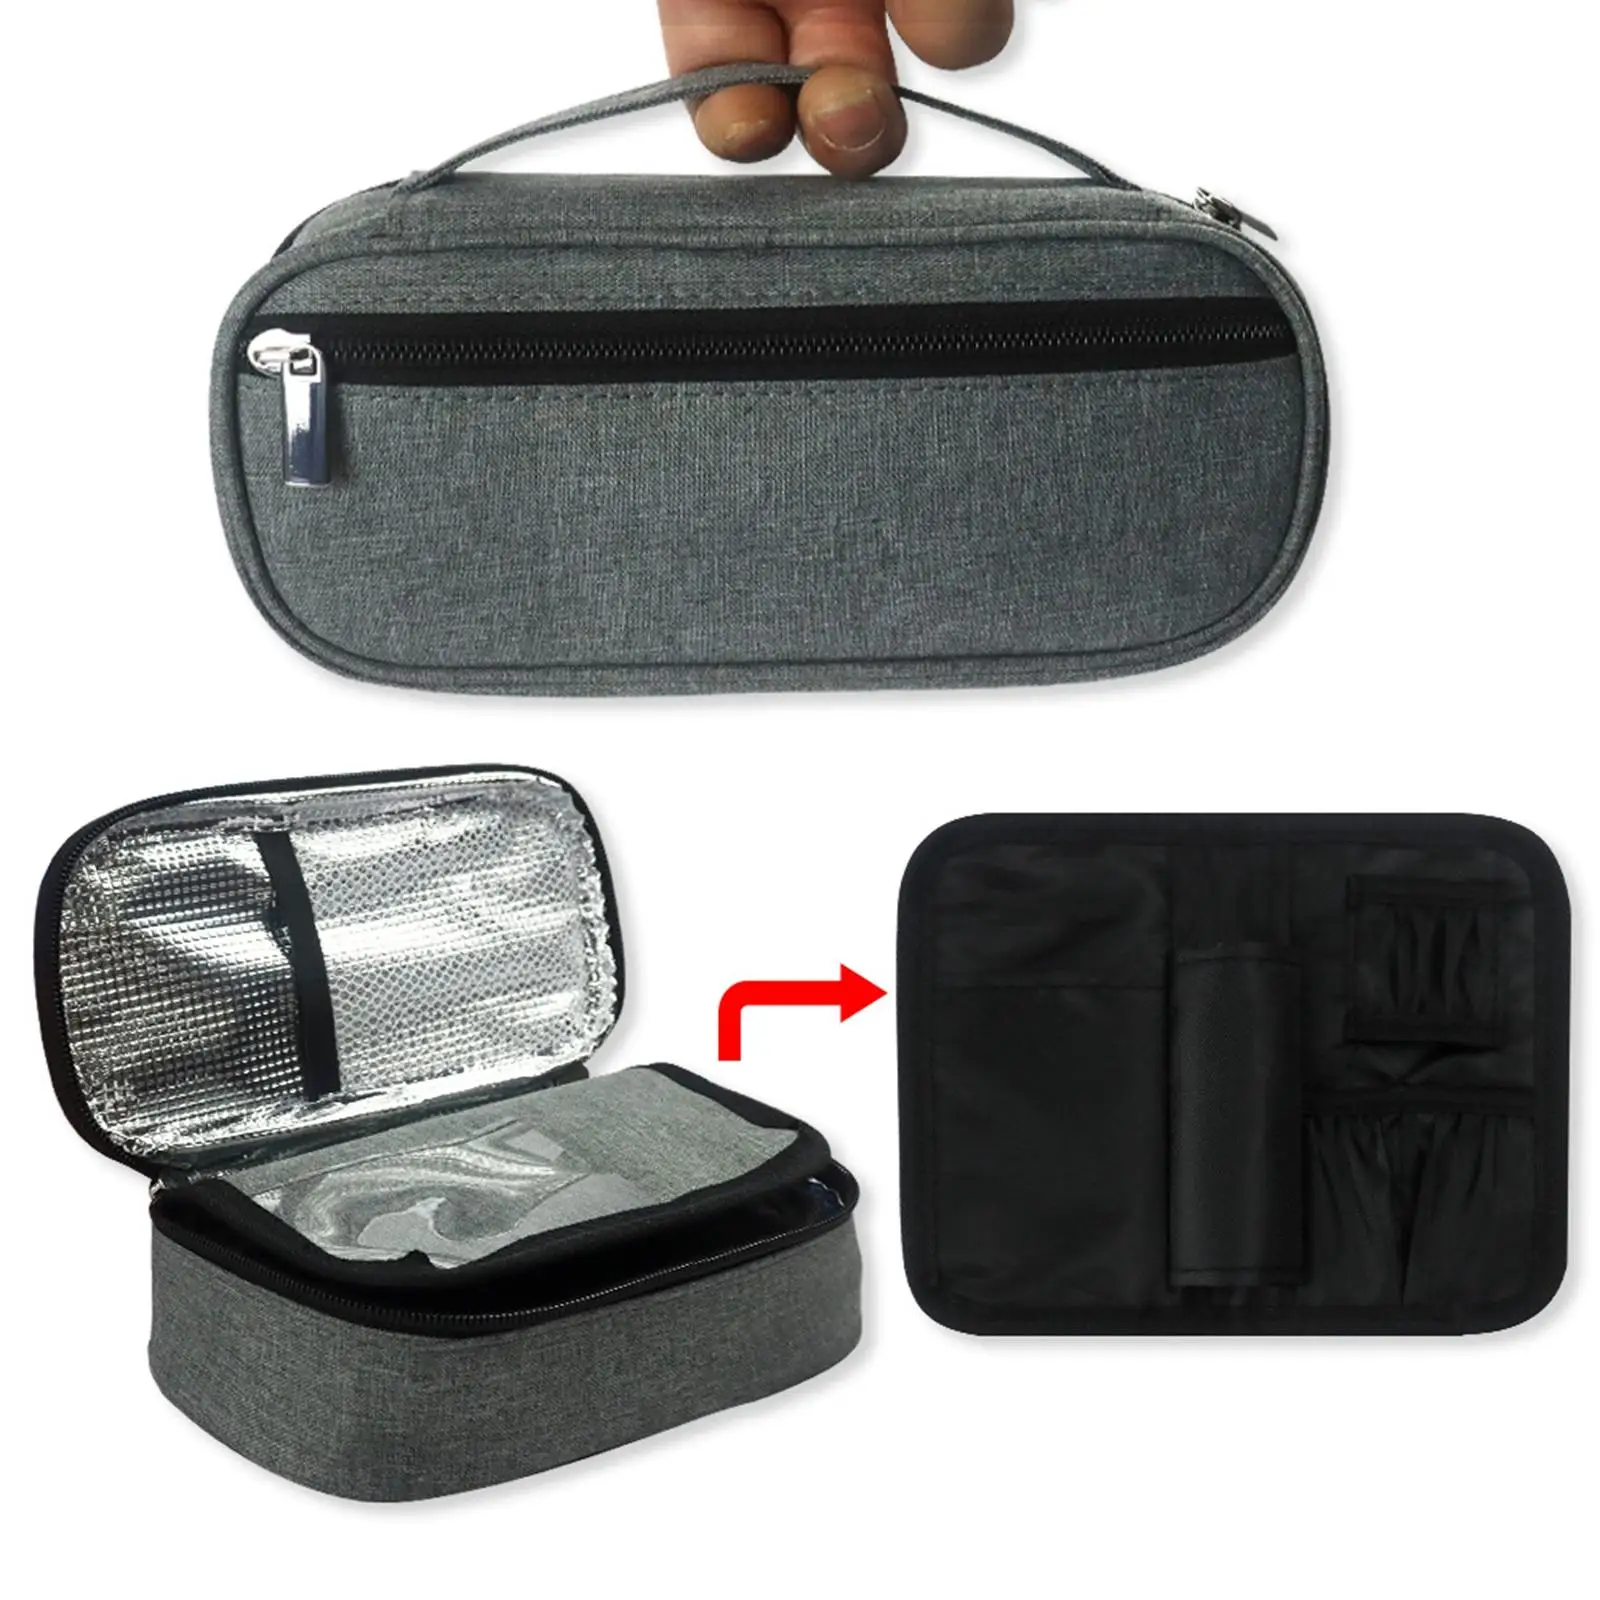 Reusable Cooler Travel Case with Detachable Pouch Protector Organizer Cooling Bag